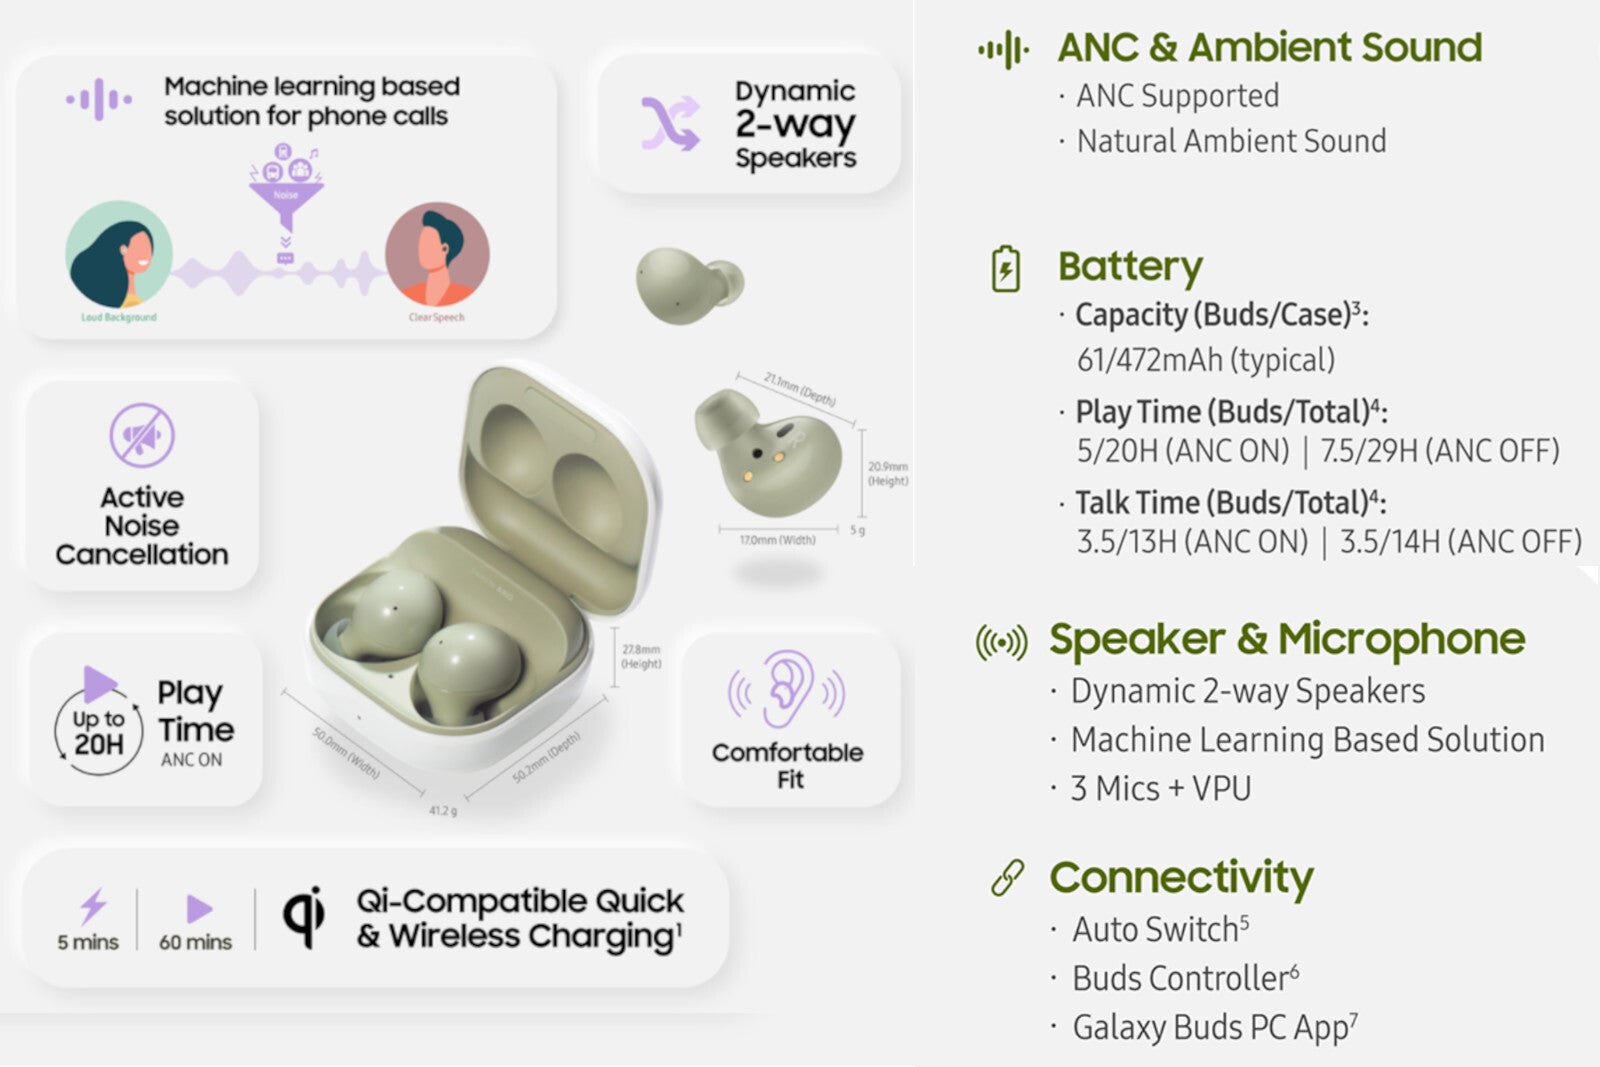 Galaxy Buds 2 are officially out - get them for free at AT&amp;T!